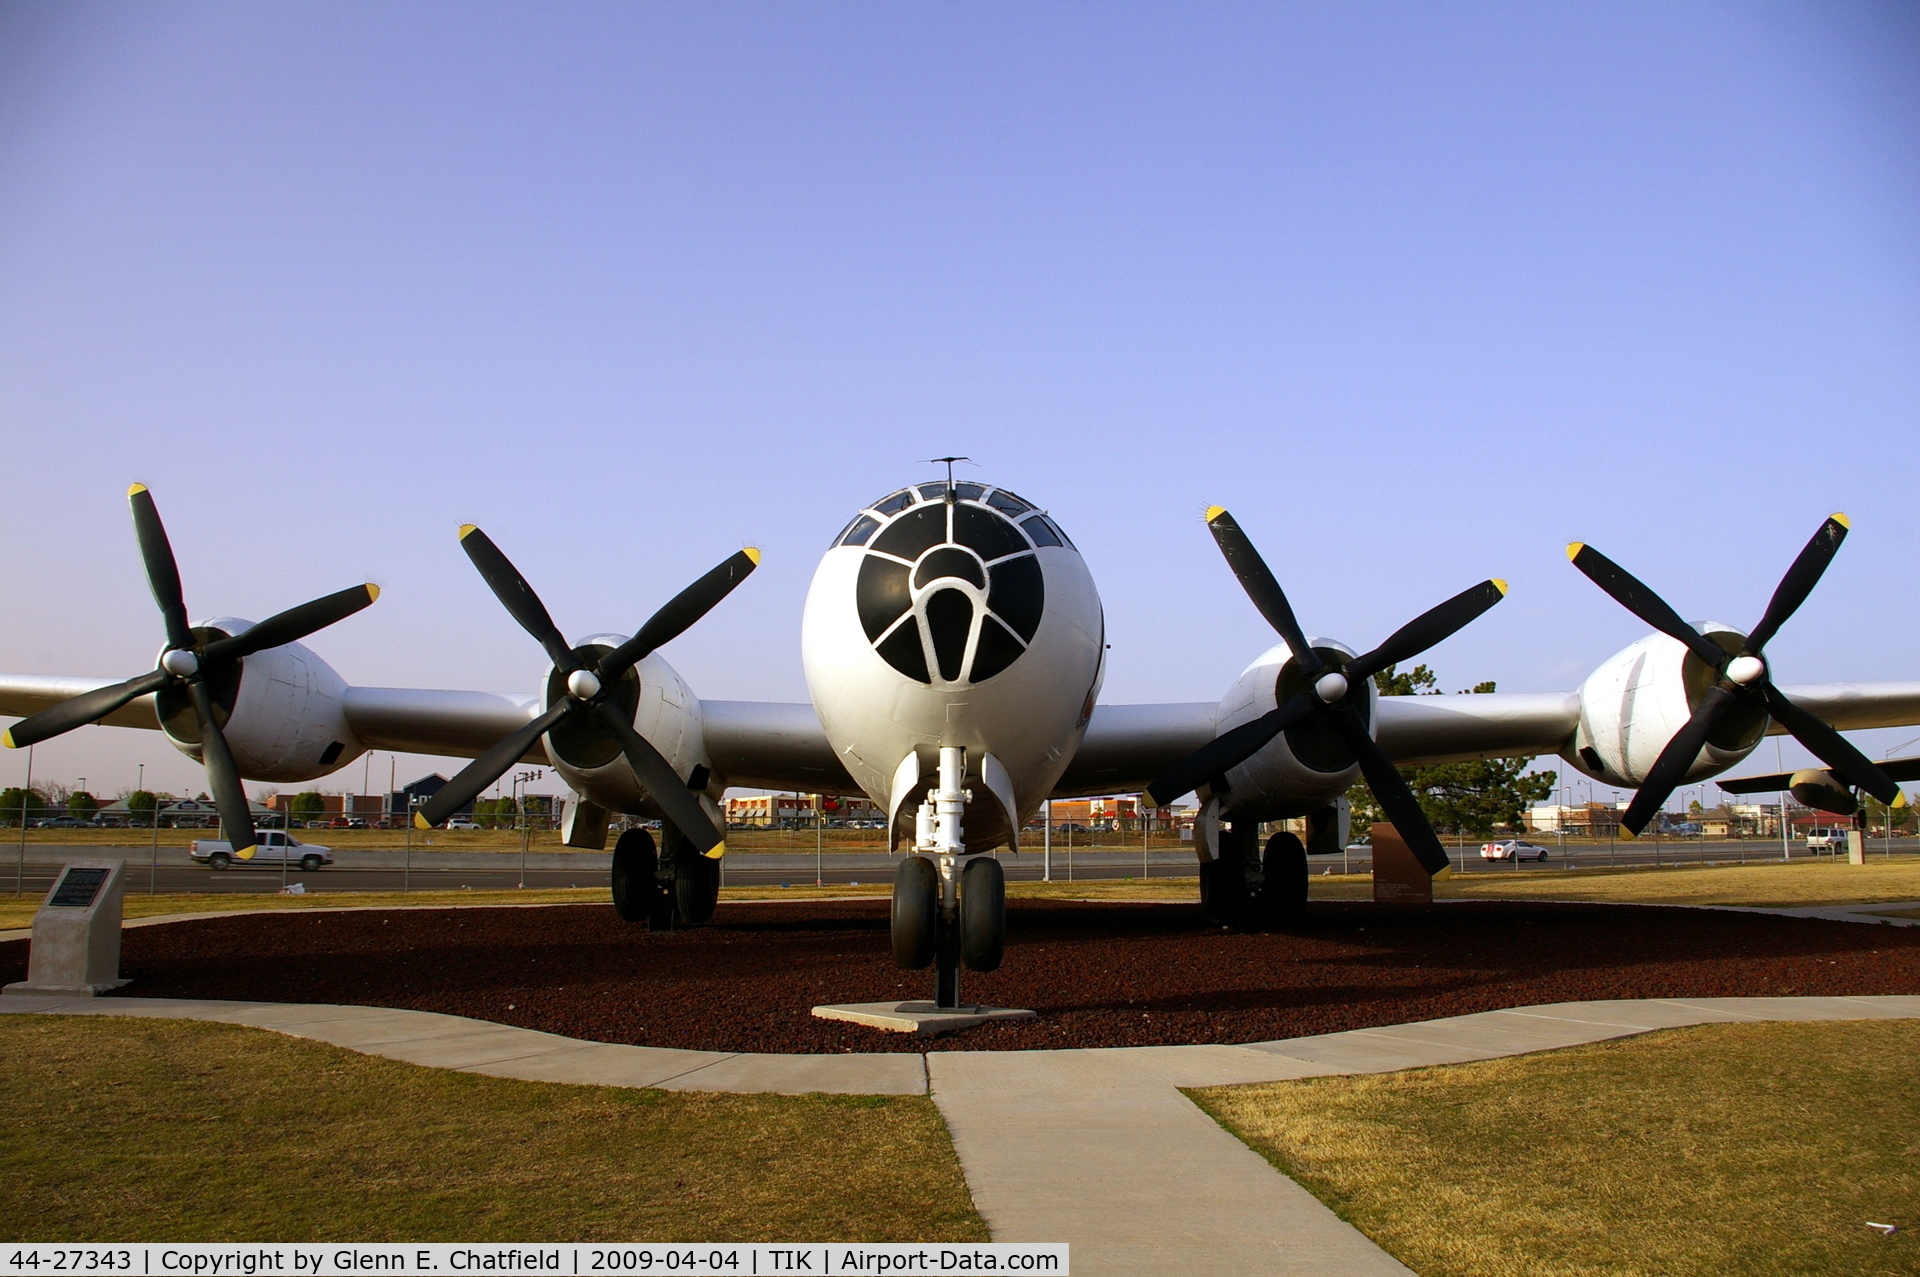 44-27343, 1944 Boeing B-29-40-MO Superfortress C/N Not found 44-27343, Heritage Collection at Tinker AFB, OK